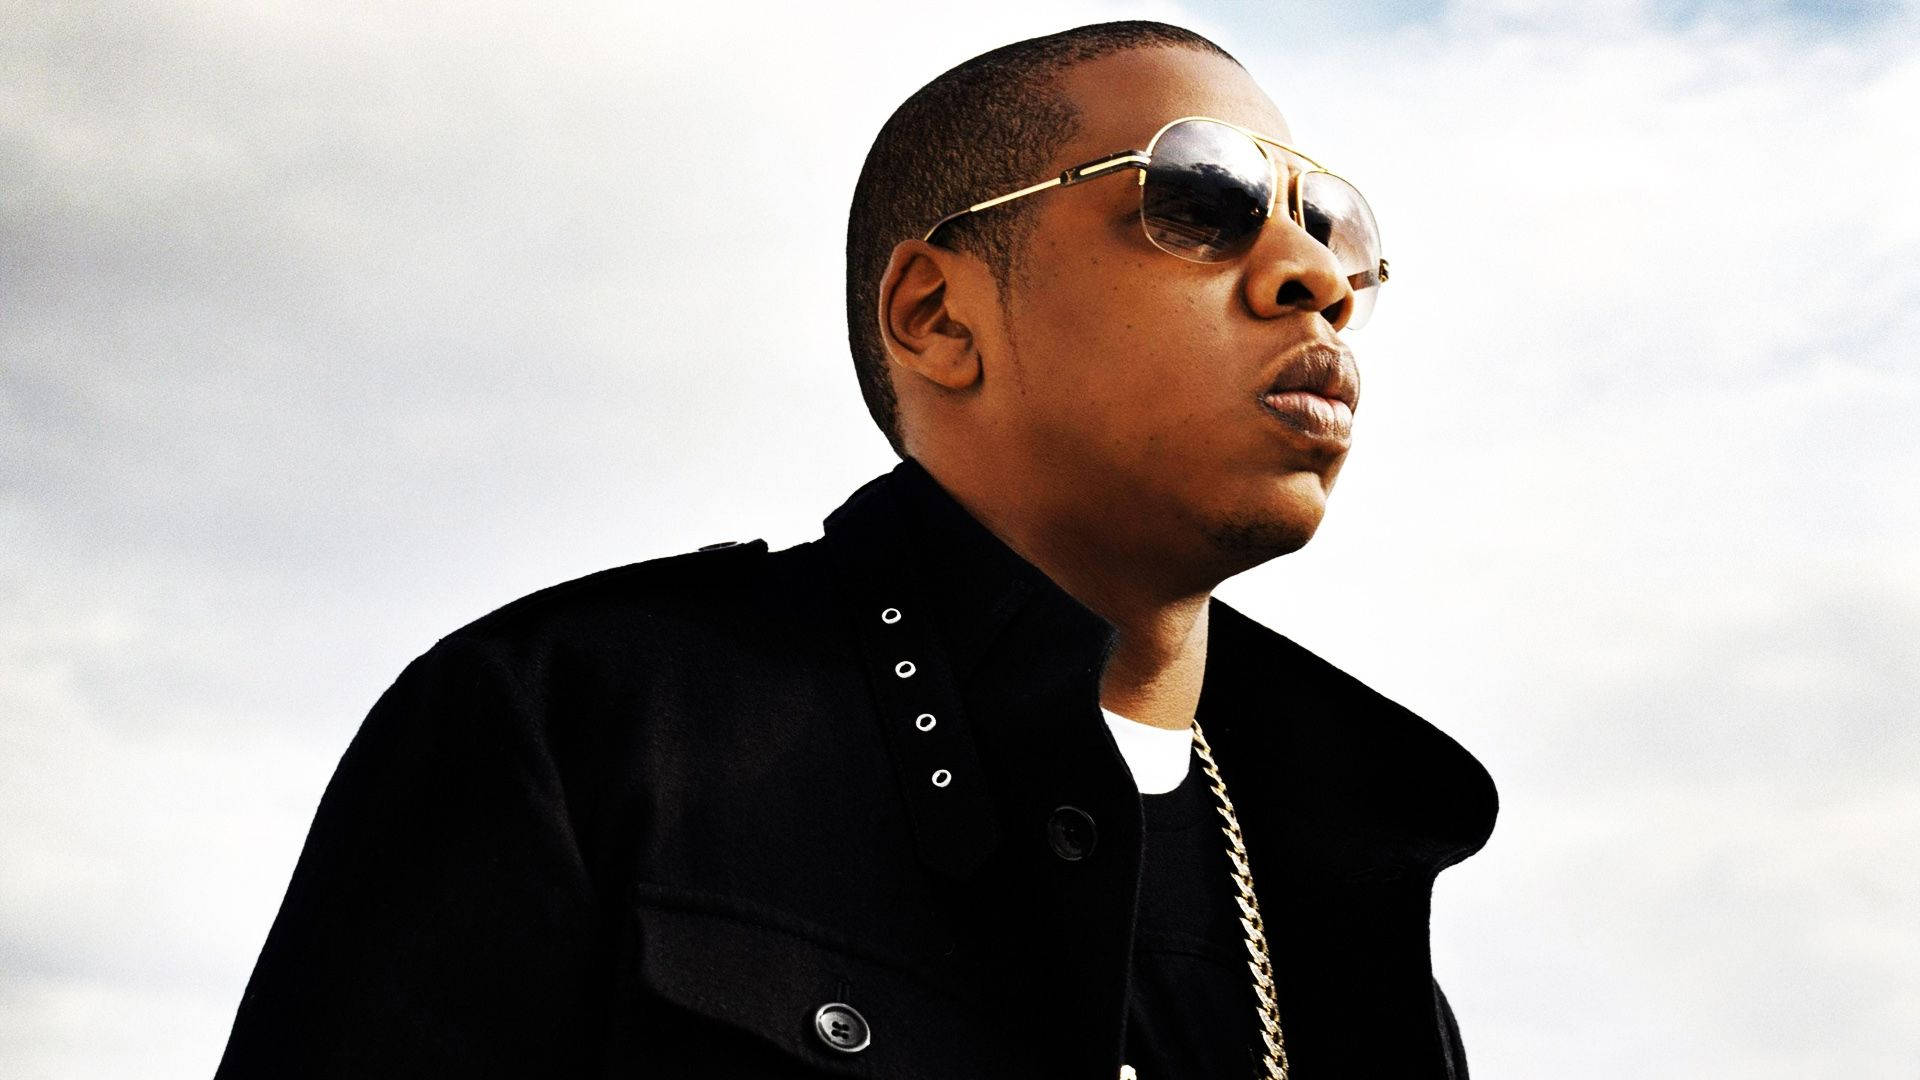 Jay-z With Cloudy Sky Wallpaper